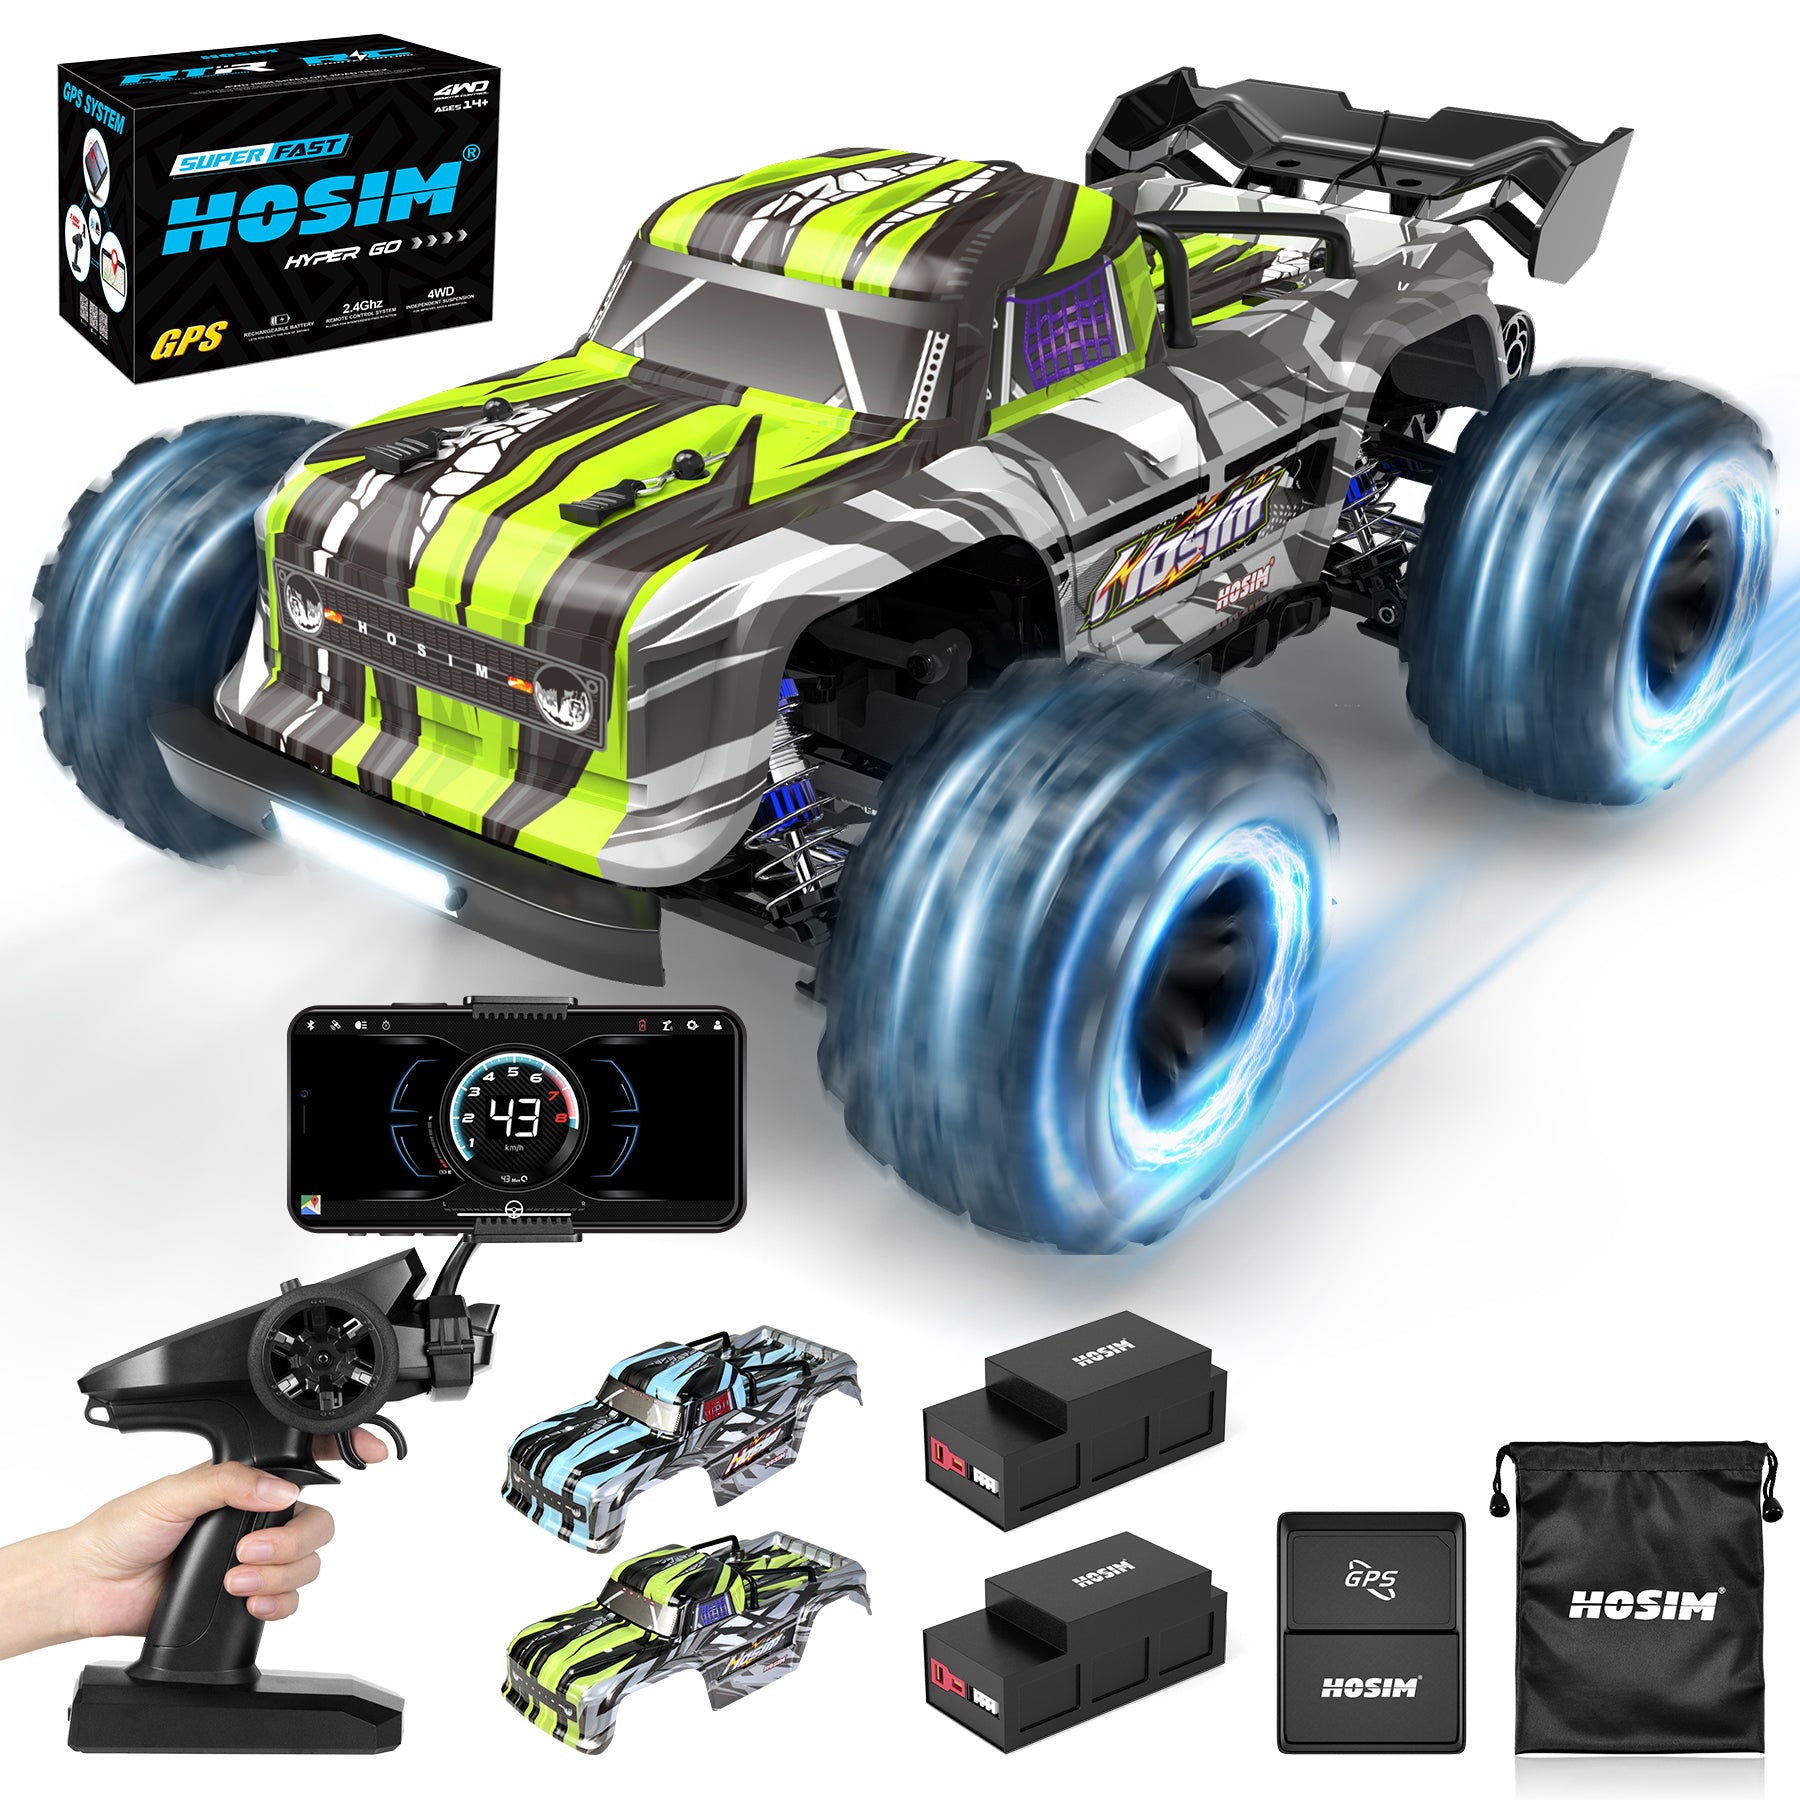 Hosim Bluetooth GPS RC Car 1:16 4WD Remote Control Truck with App，Radio Cars Off Road Waterproof Hobby Grade Trucks for Child Adults